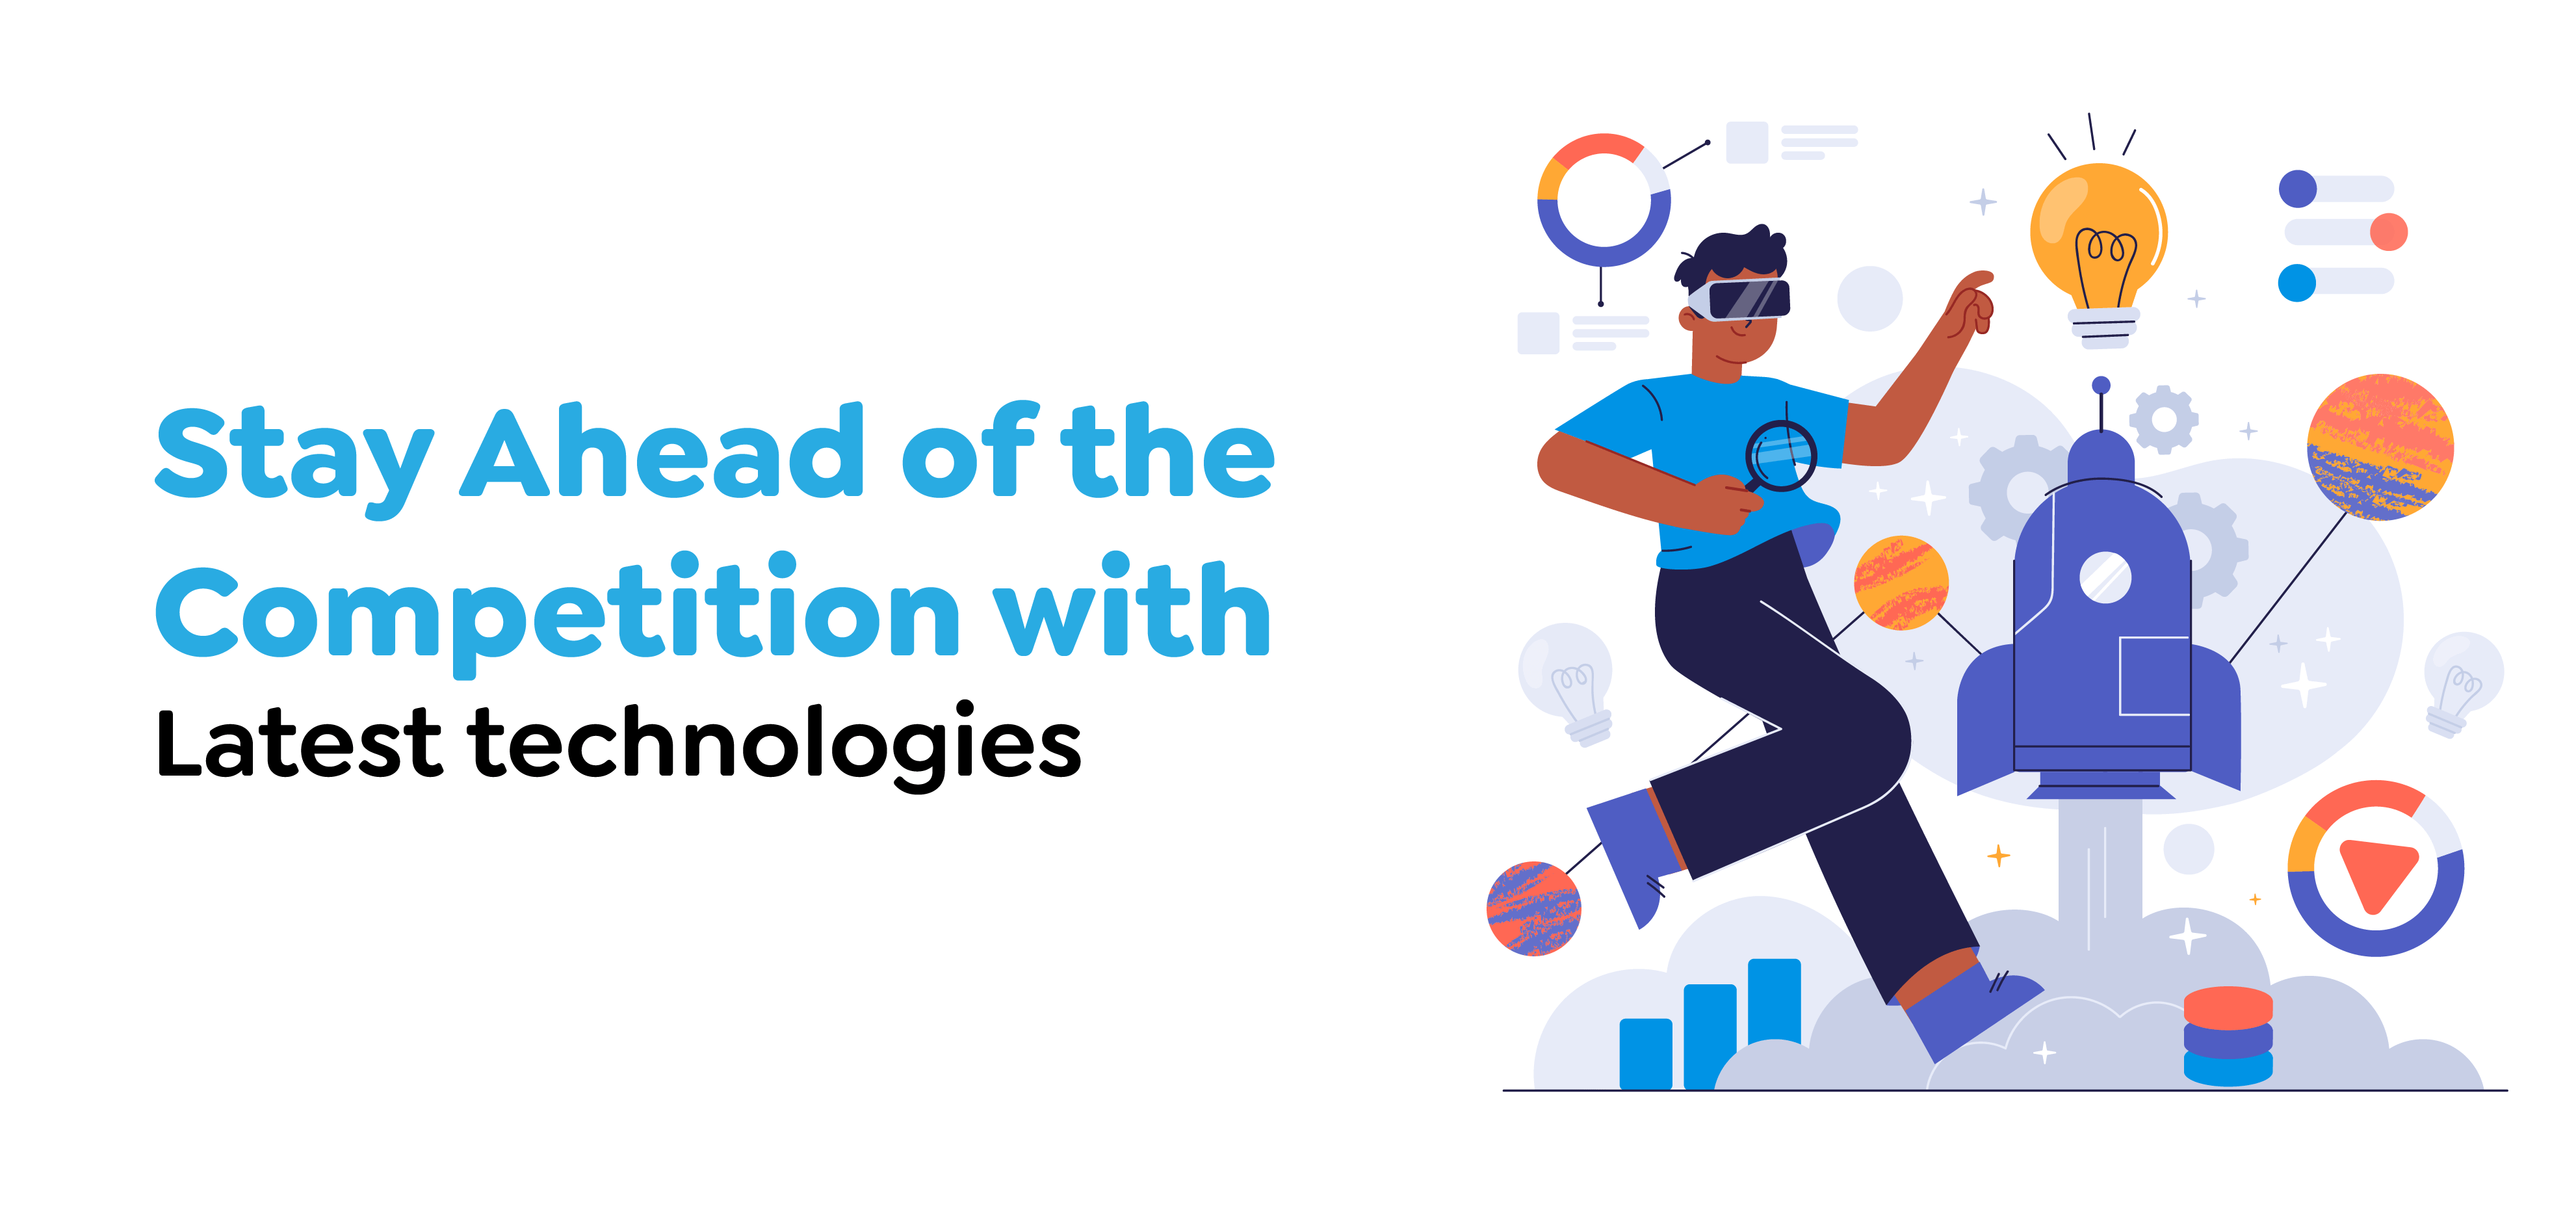 Stay Ahead of the Competition with Latest technologies